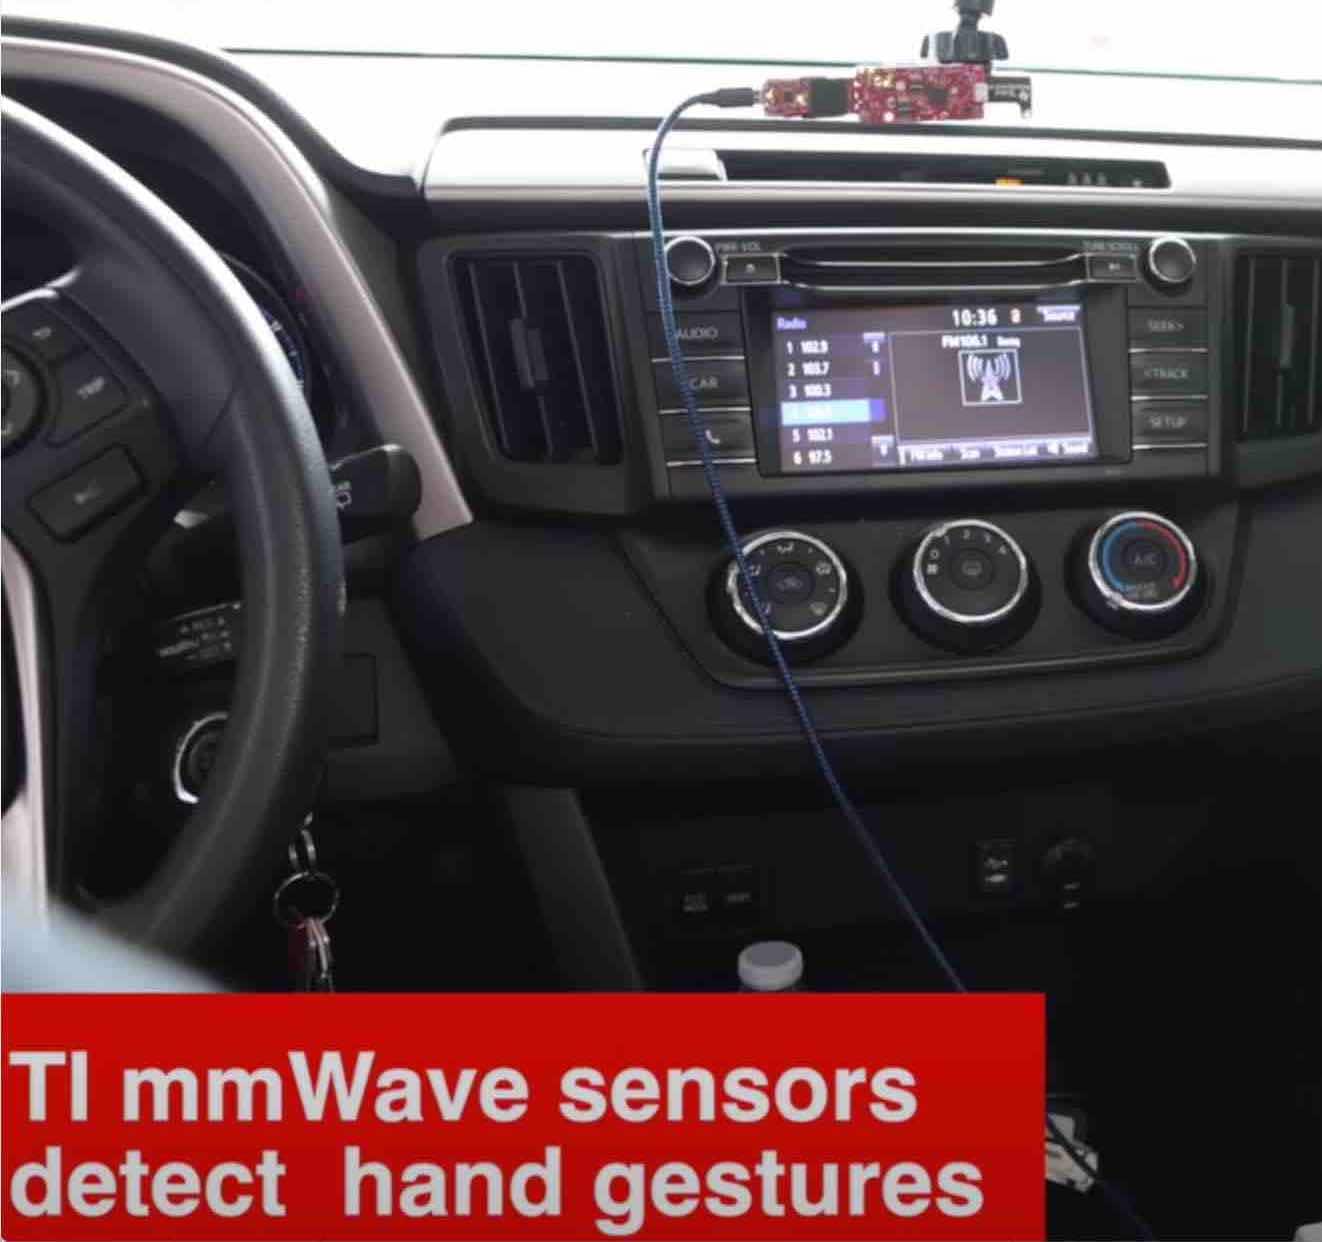 Intelligent In-cabin Gestures with Imagimob and TI Radars